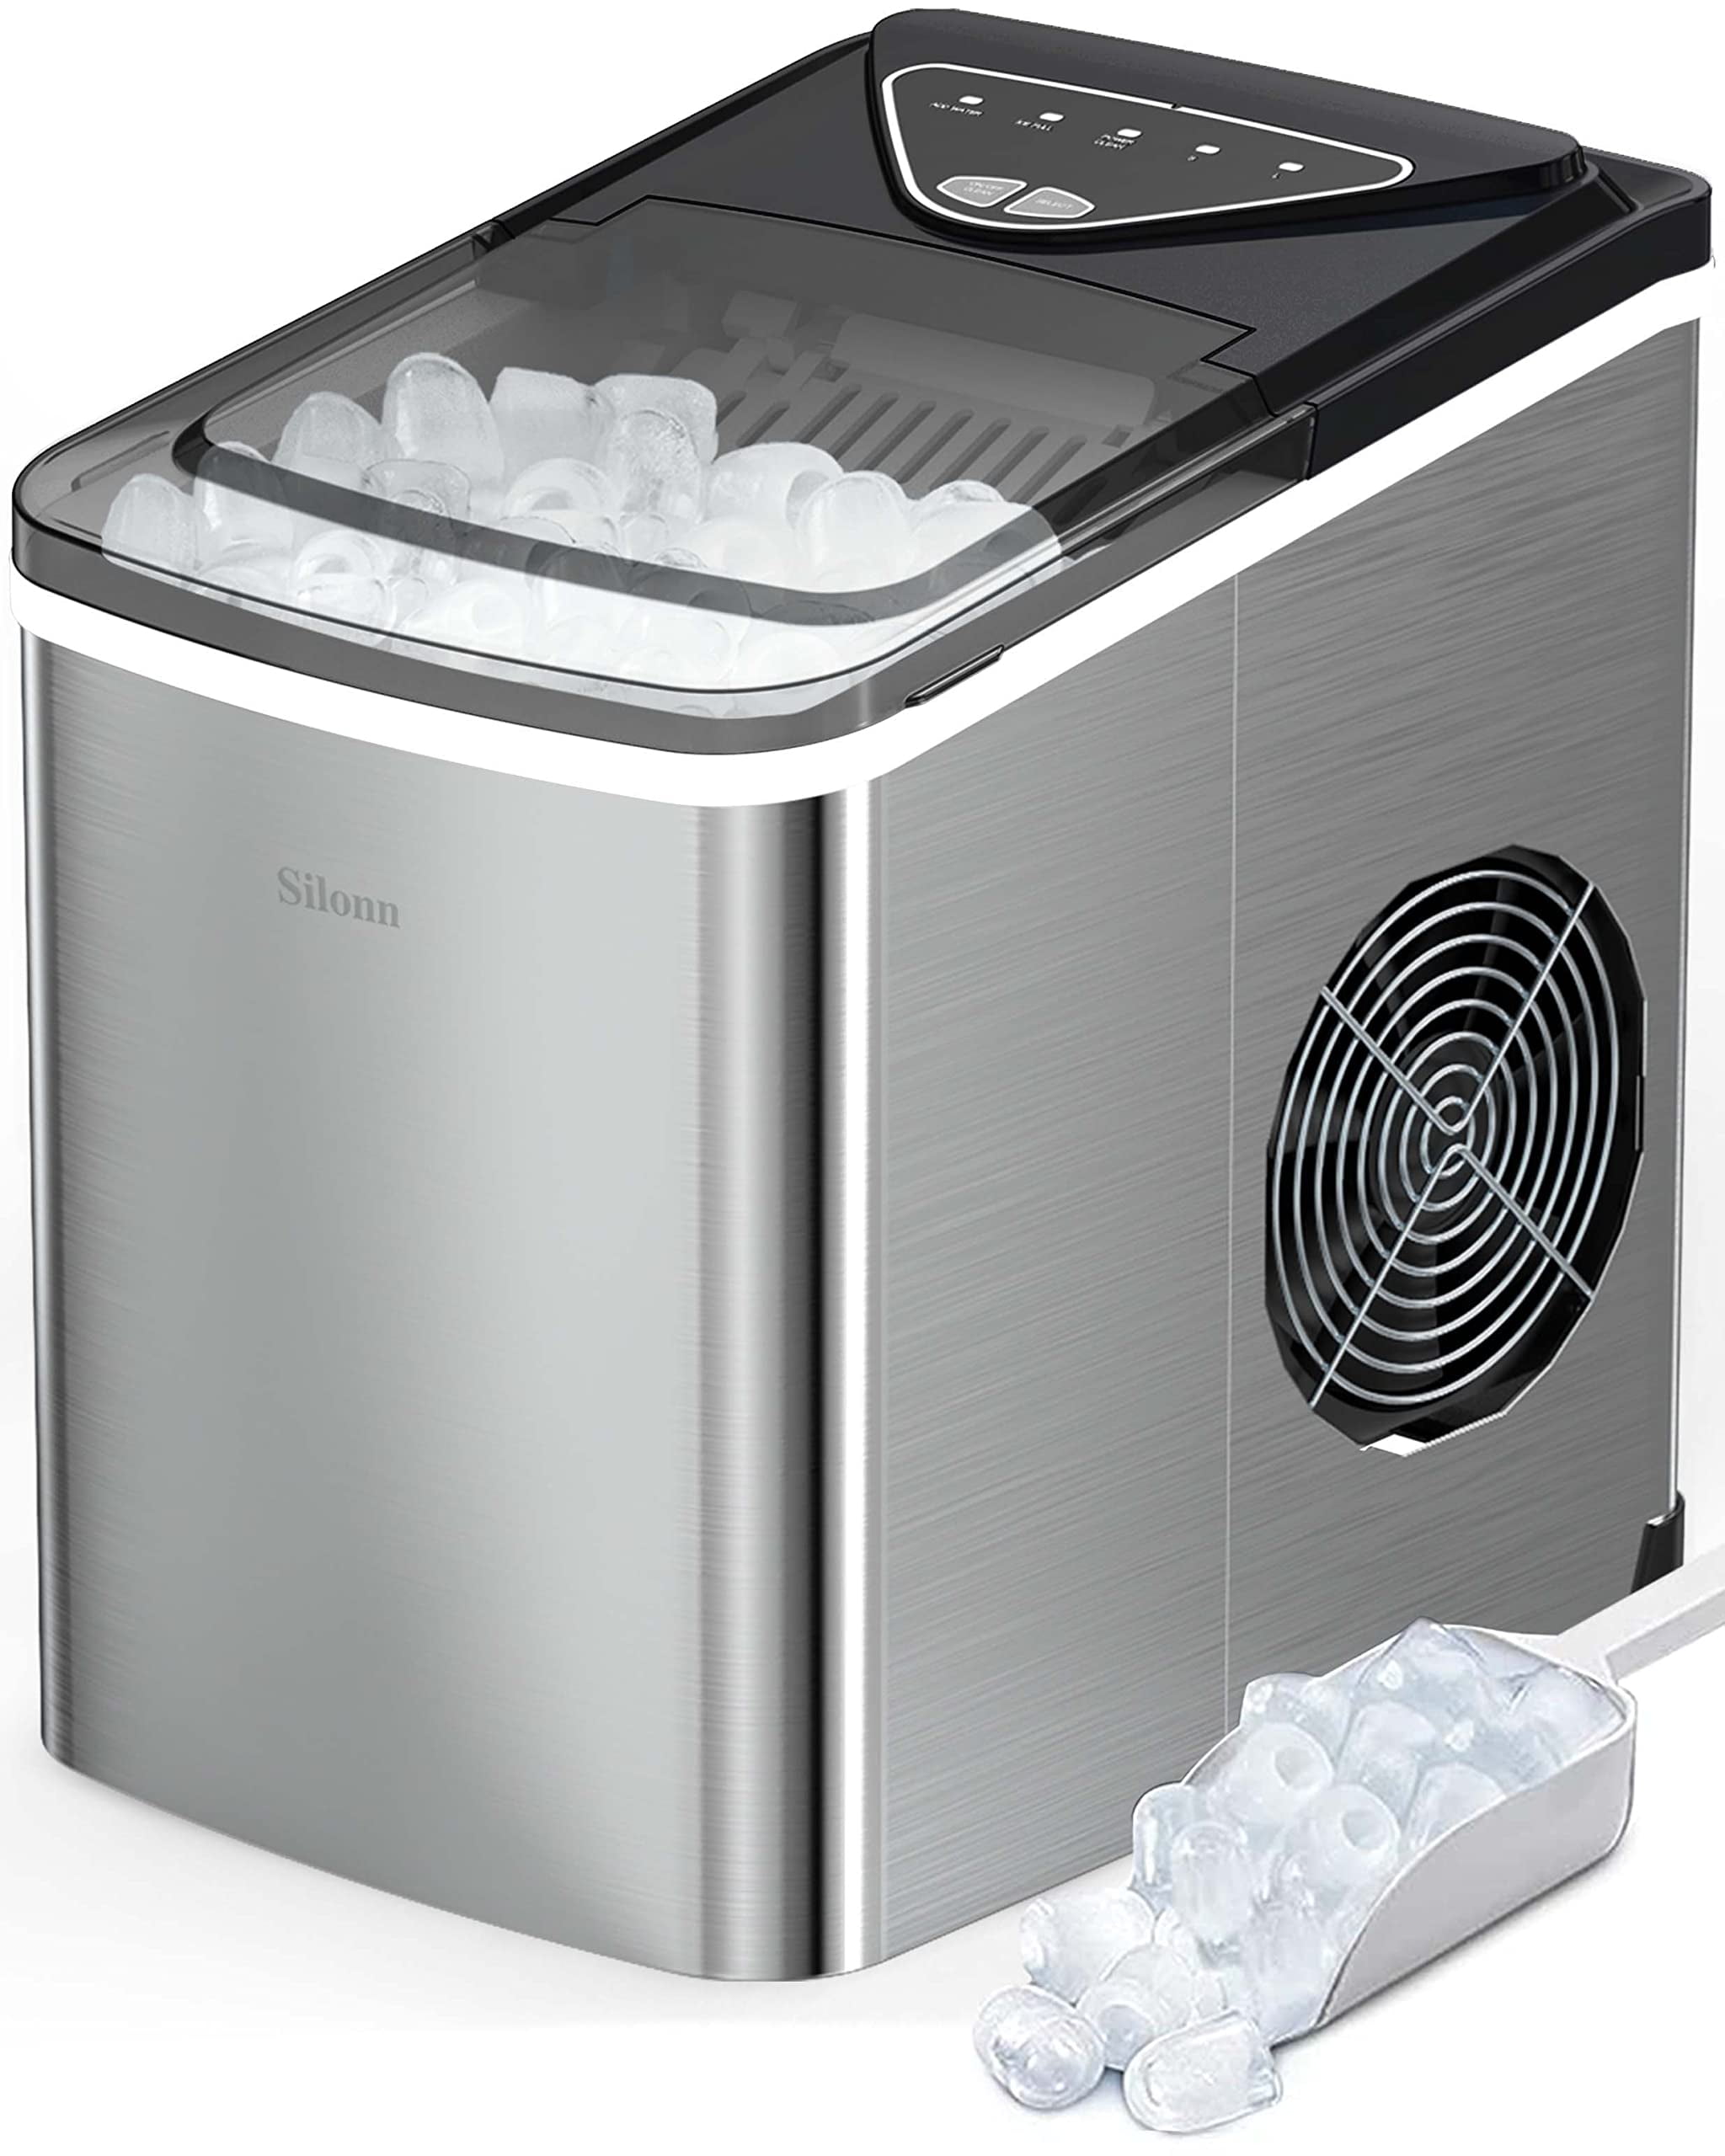 Ice Maker Countertop with Handle,9 Cubes Ready in 6 26 lbs, mini-black